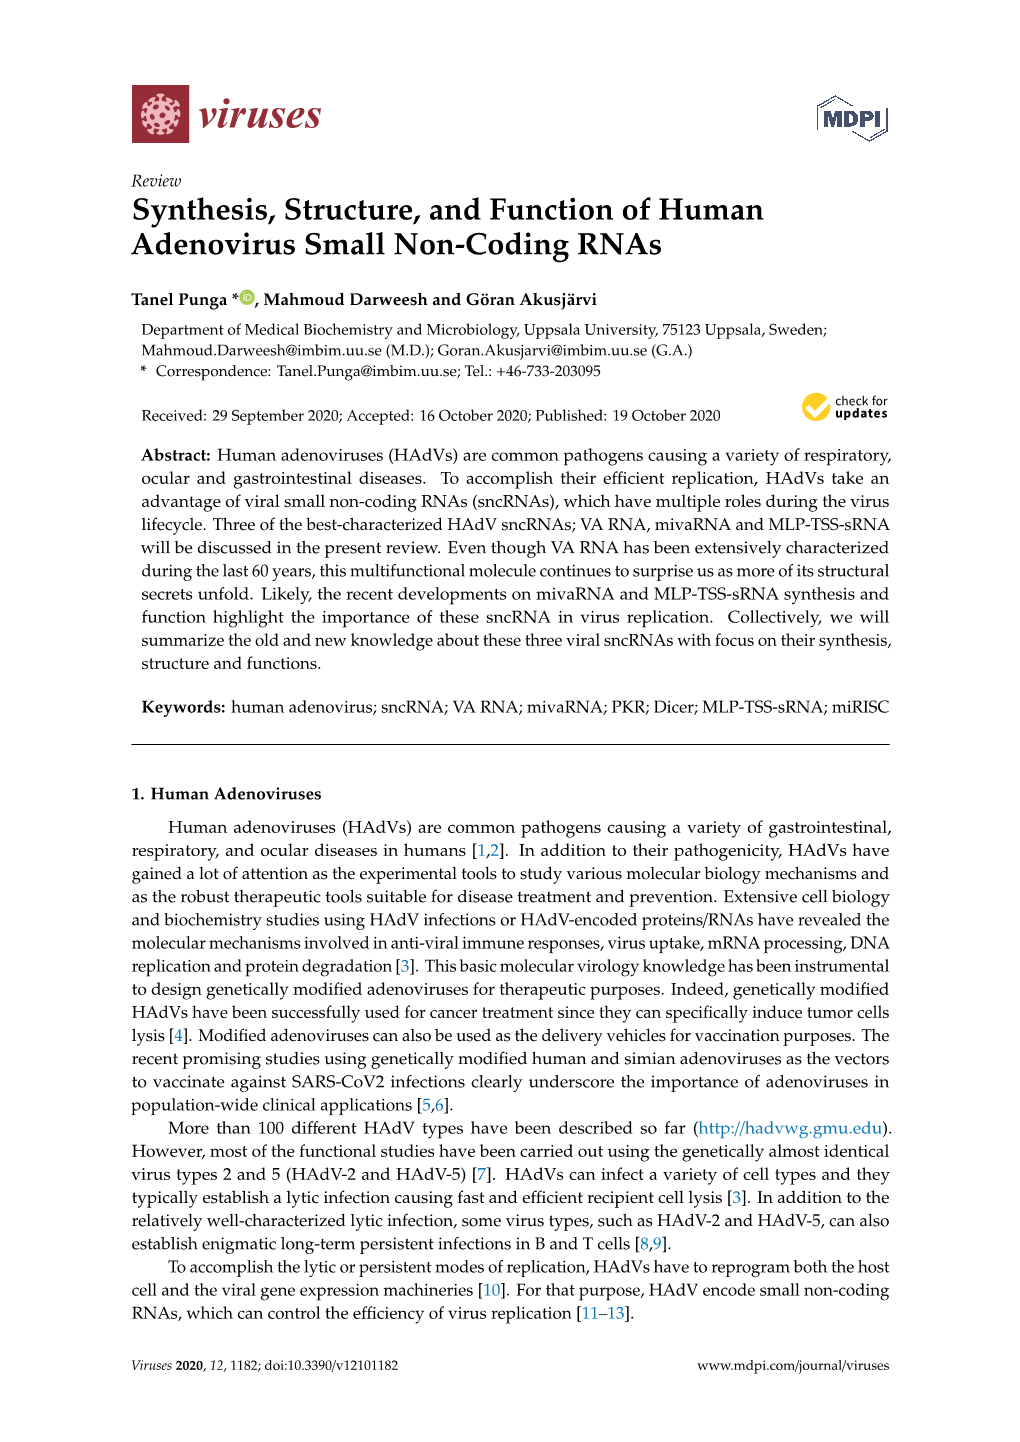 Synthesis, Structure, and Function of Human Adenovirus Small Non-Coding Rnas